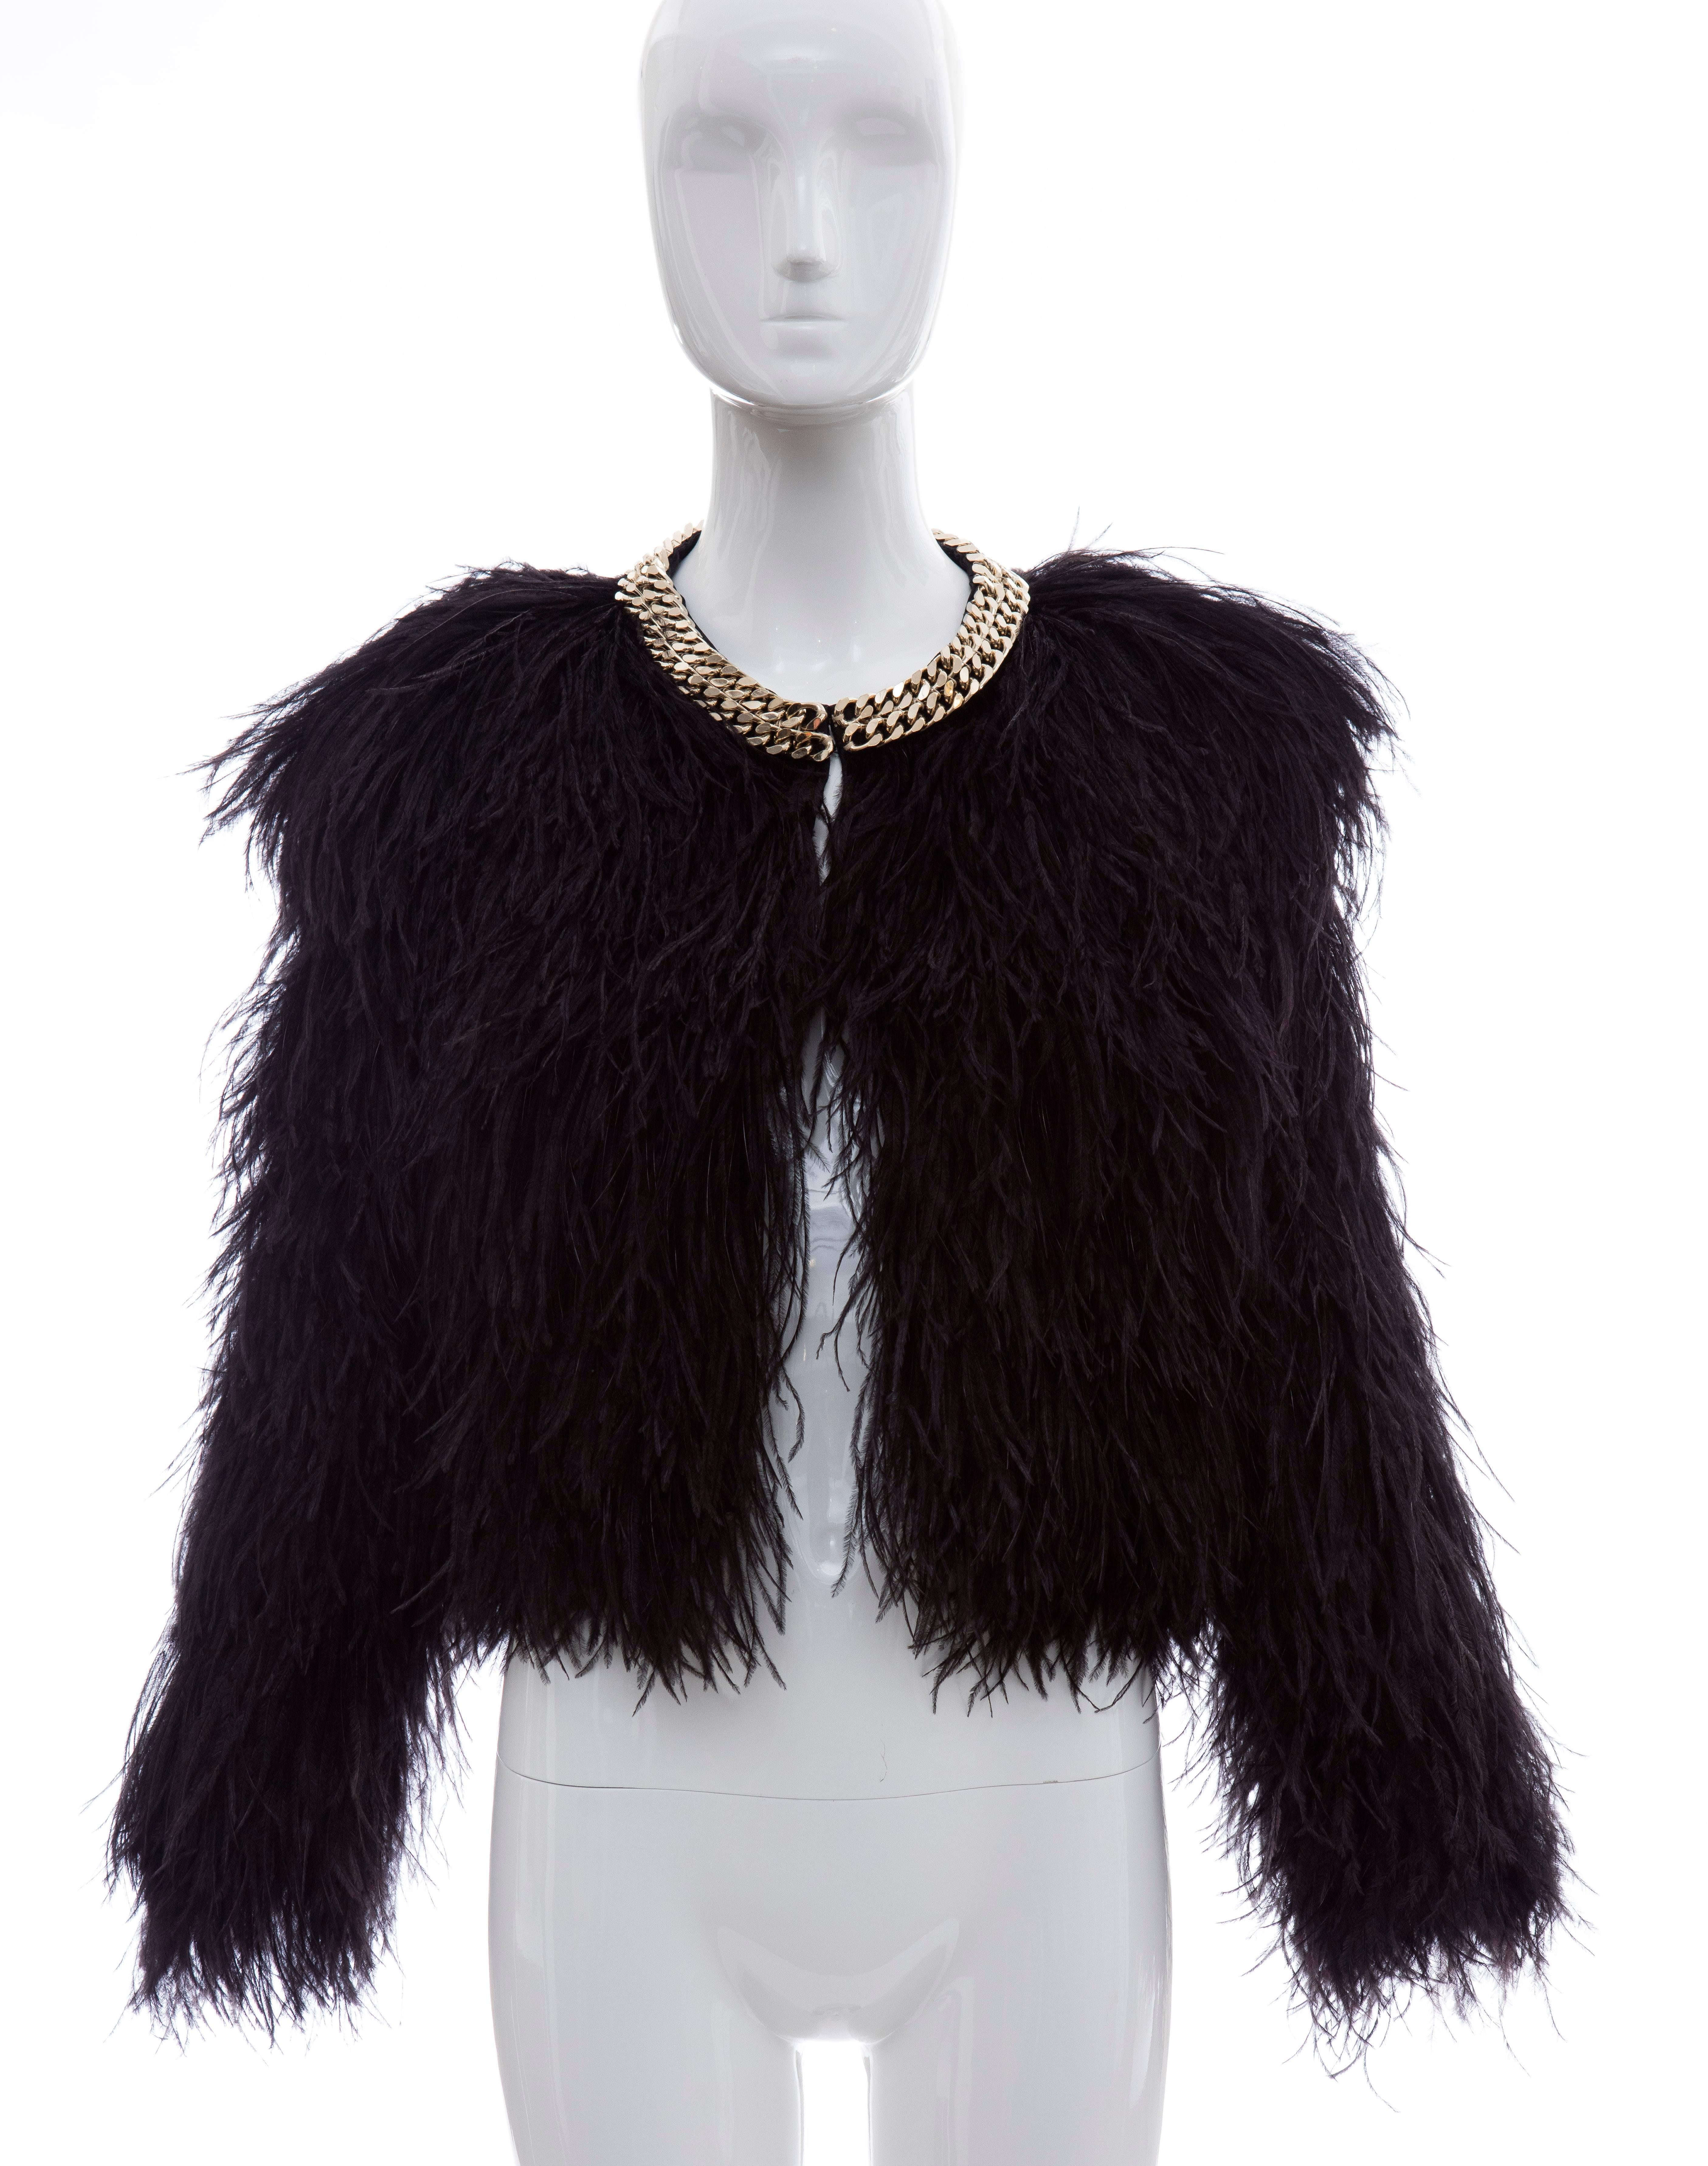 Givenchy black ostrich feather jacket with gold-tone chain trim collar. open front and fully lined in silk.

Bust 36”, Waist 36”, Shoulder 17”,  Length 17”

EU. size 38

US. size 6